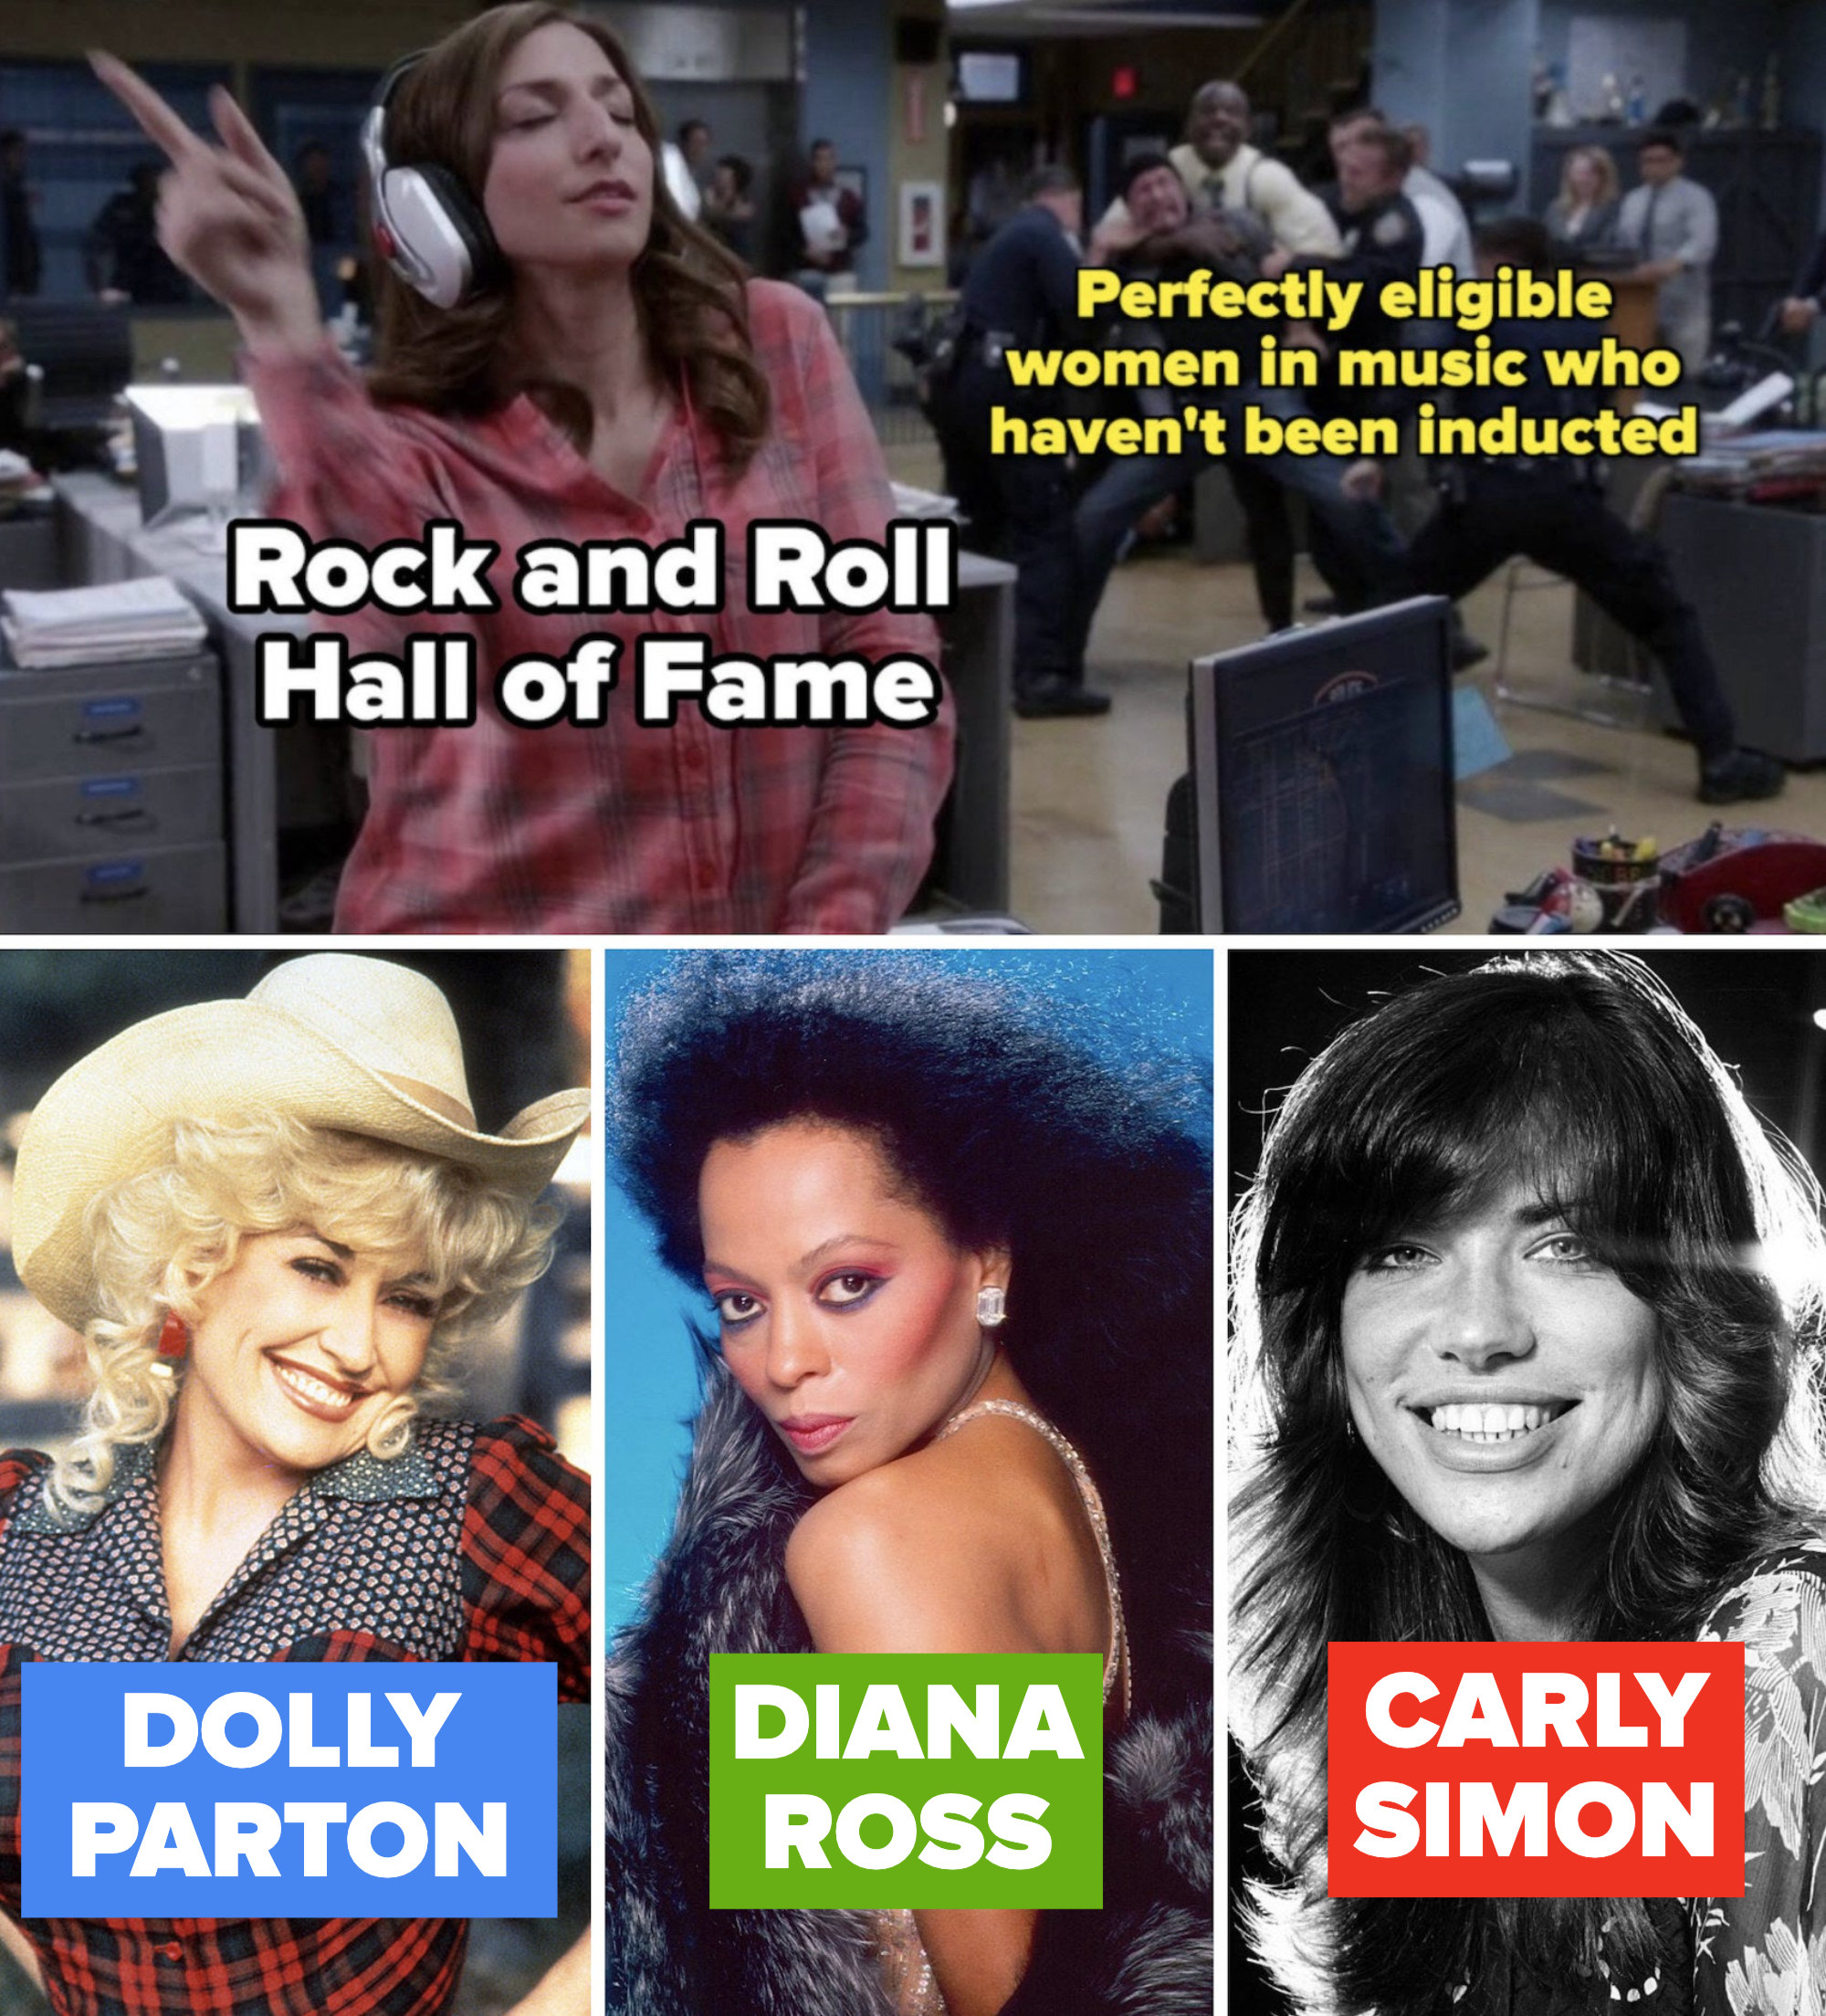 Gina &quot;B99&quot; music meme reimagined as &quot;Rock and Roll Hall of Fame&quot; and Terry as &quot;Eligible women who haven&#x27;t been inducted;&quot; Dolly Parton on the set of &quot;Rhinestone;&quot; Diana Ross posing for a portrait in 1987; Carly Simon posing for a portrait in 1971